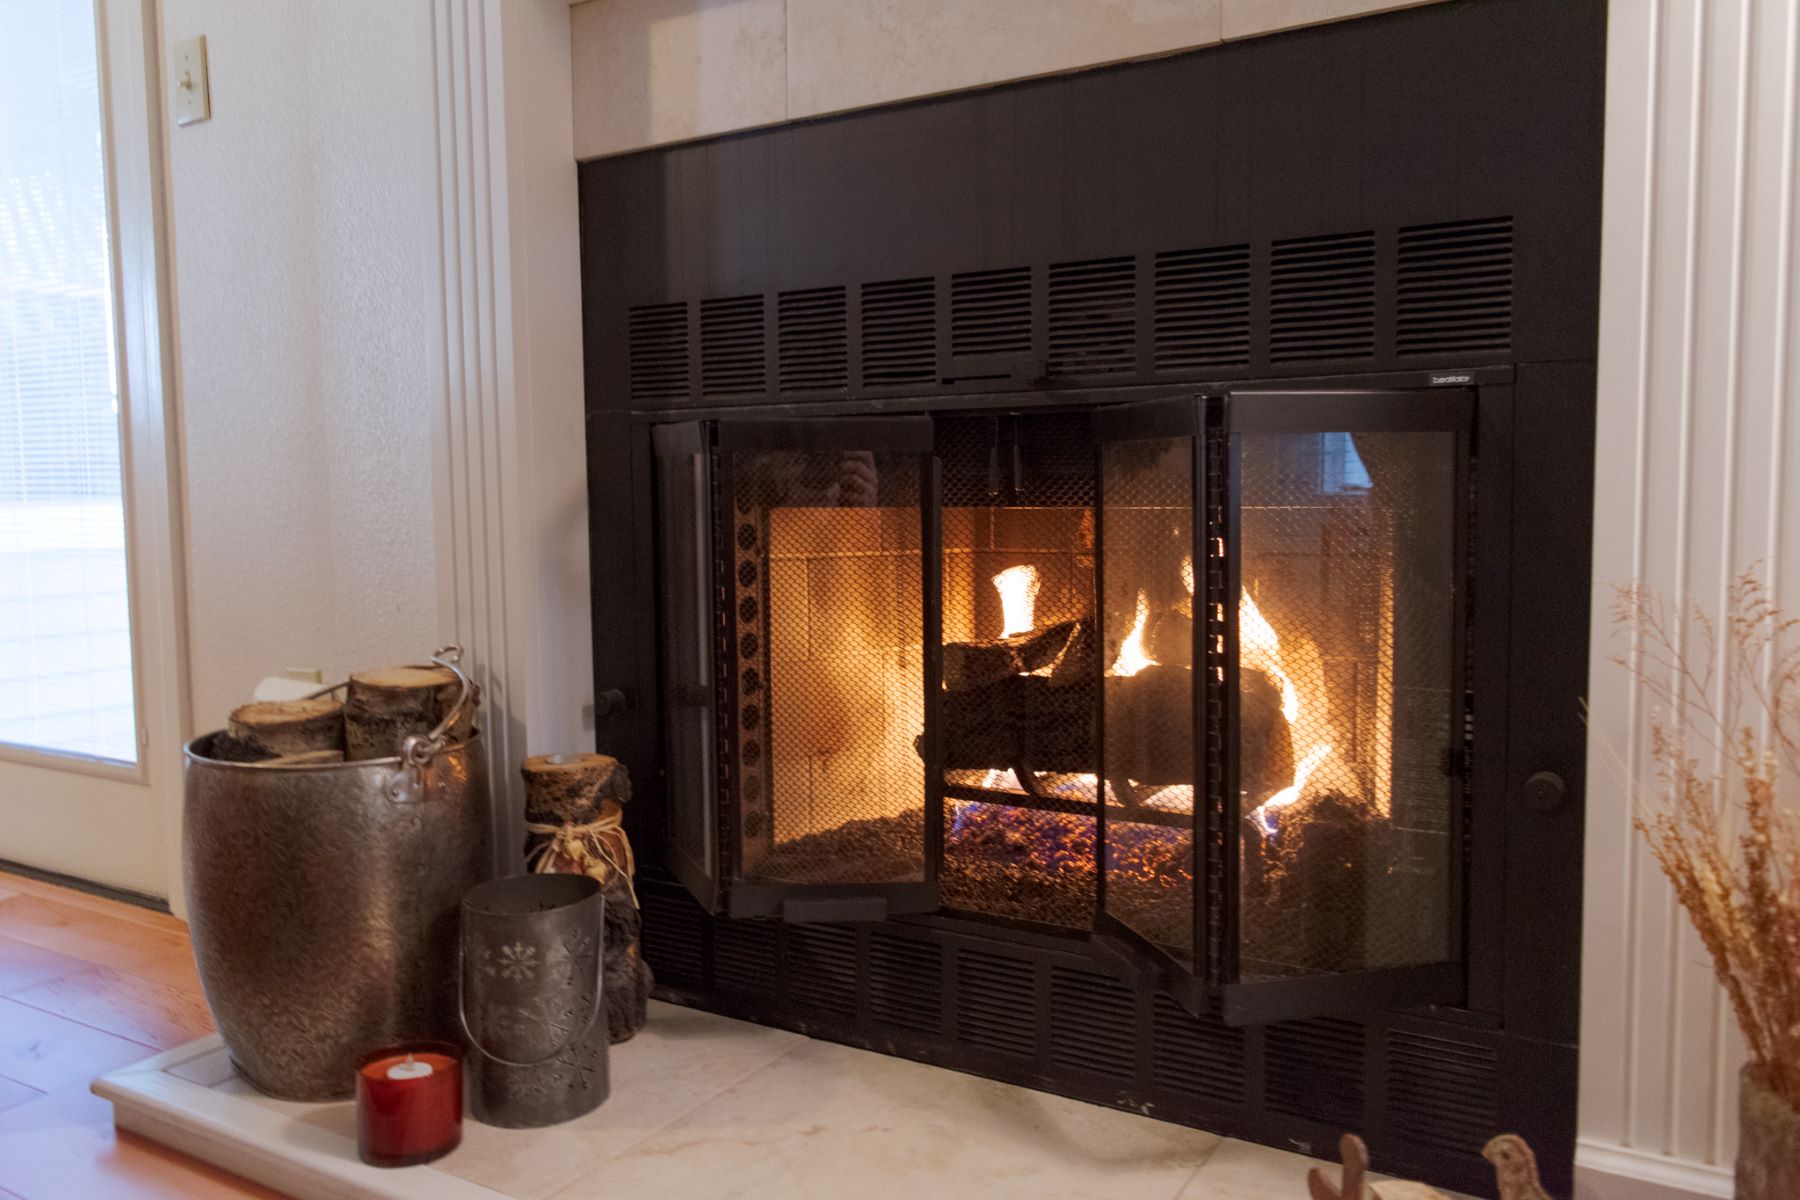 How To Use A Fireplace With Glass Doors And A Blower